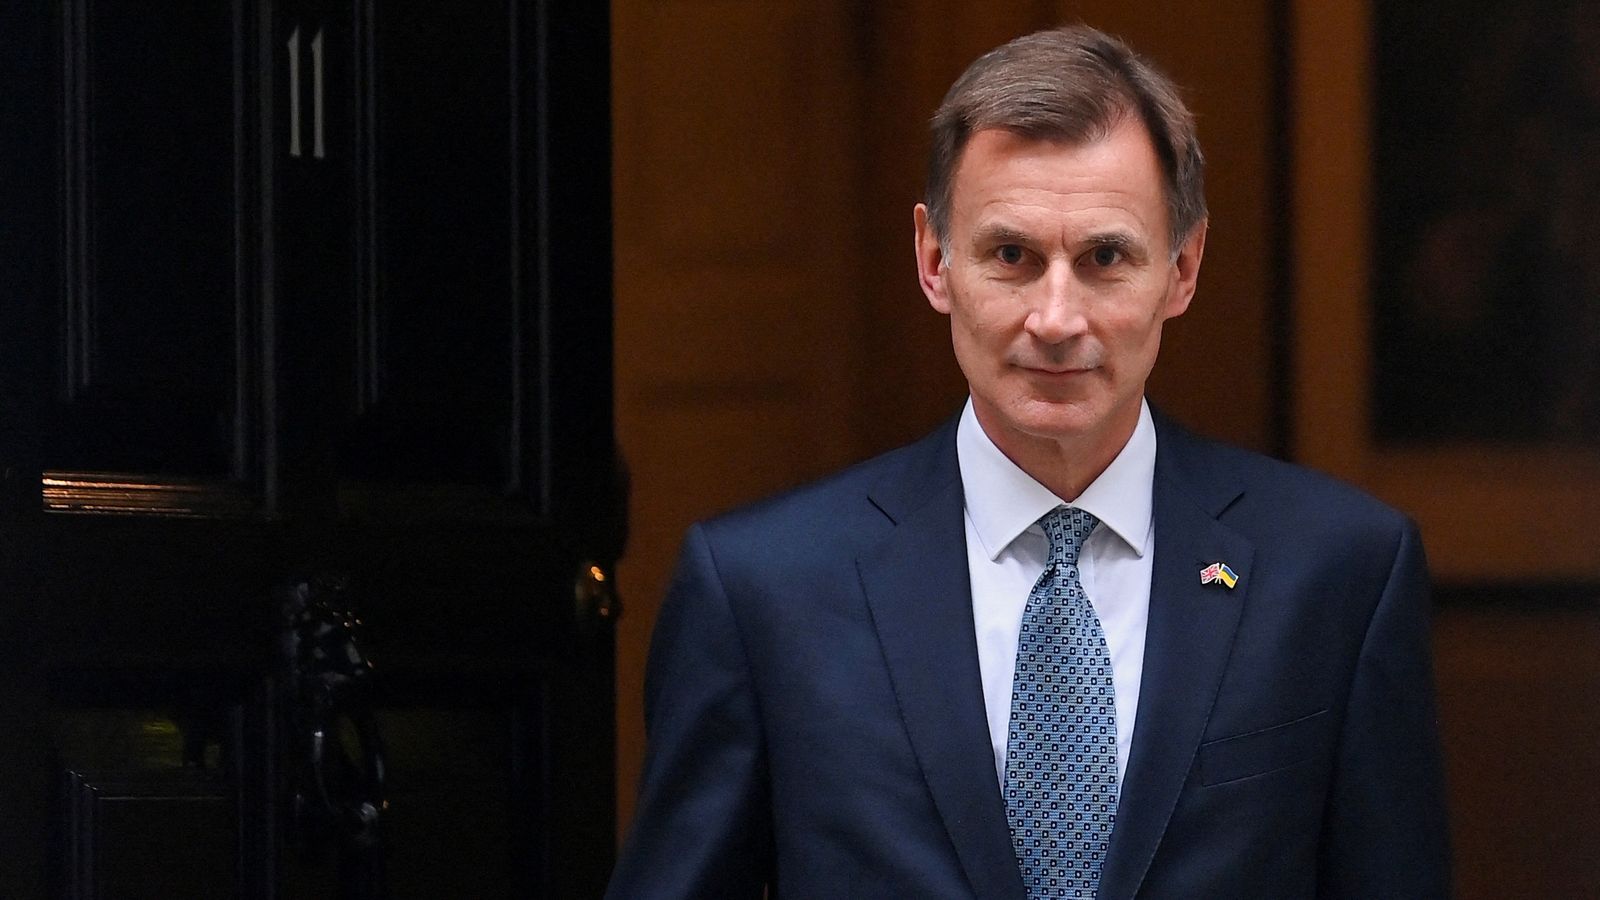 Next two years will be 'challenging' for Britons, says Chancellor Jeremy Hunt